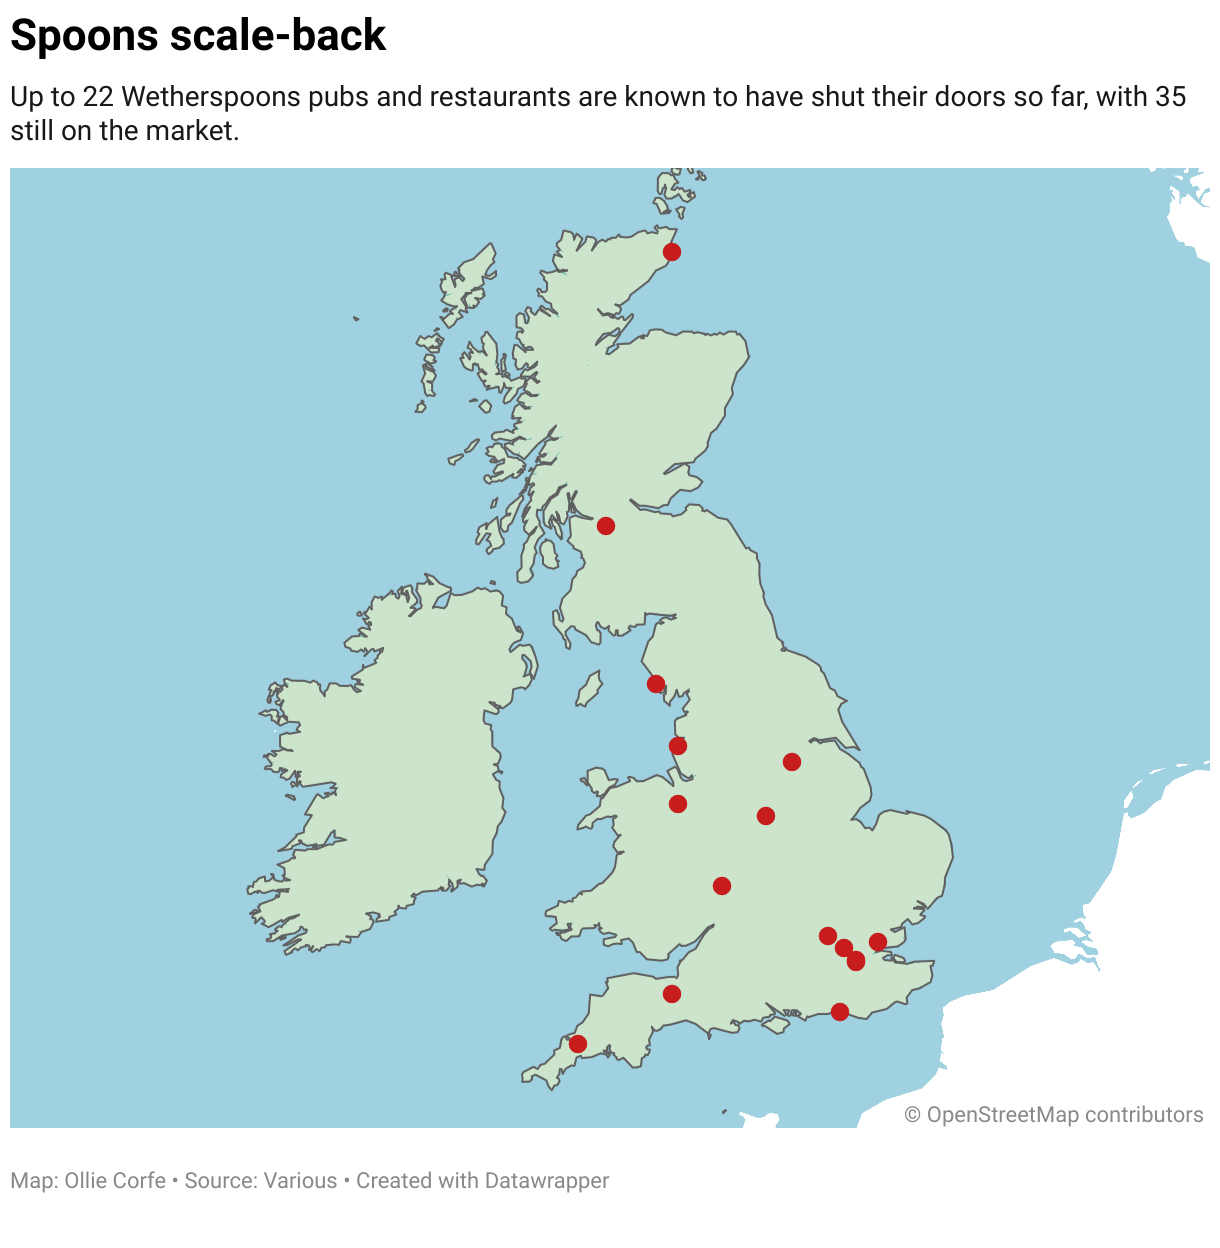 Map of recently closed Wetherspoons pubs in the UK.